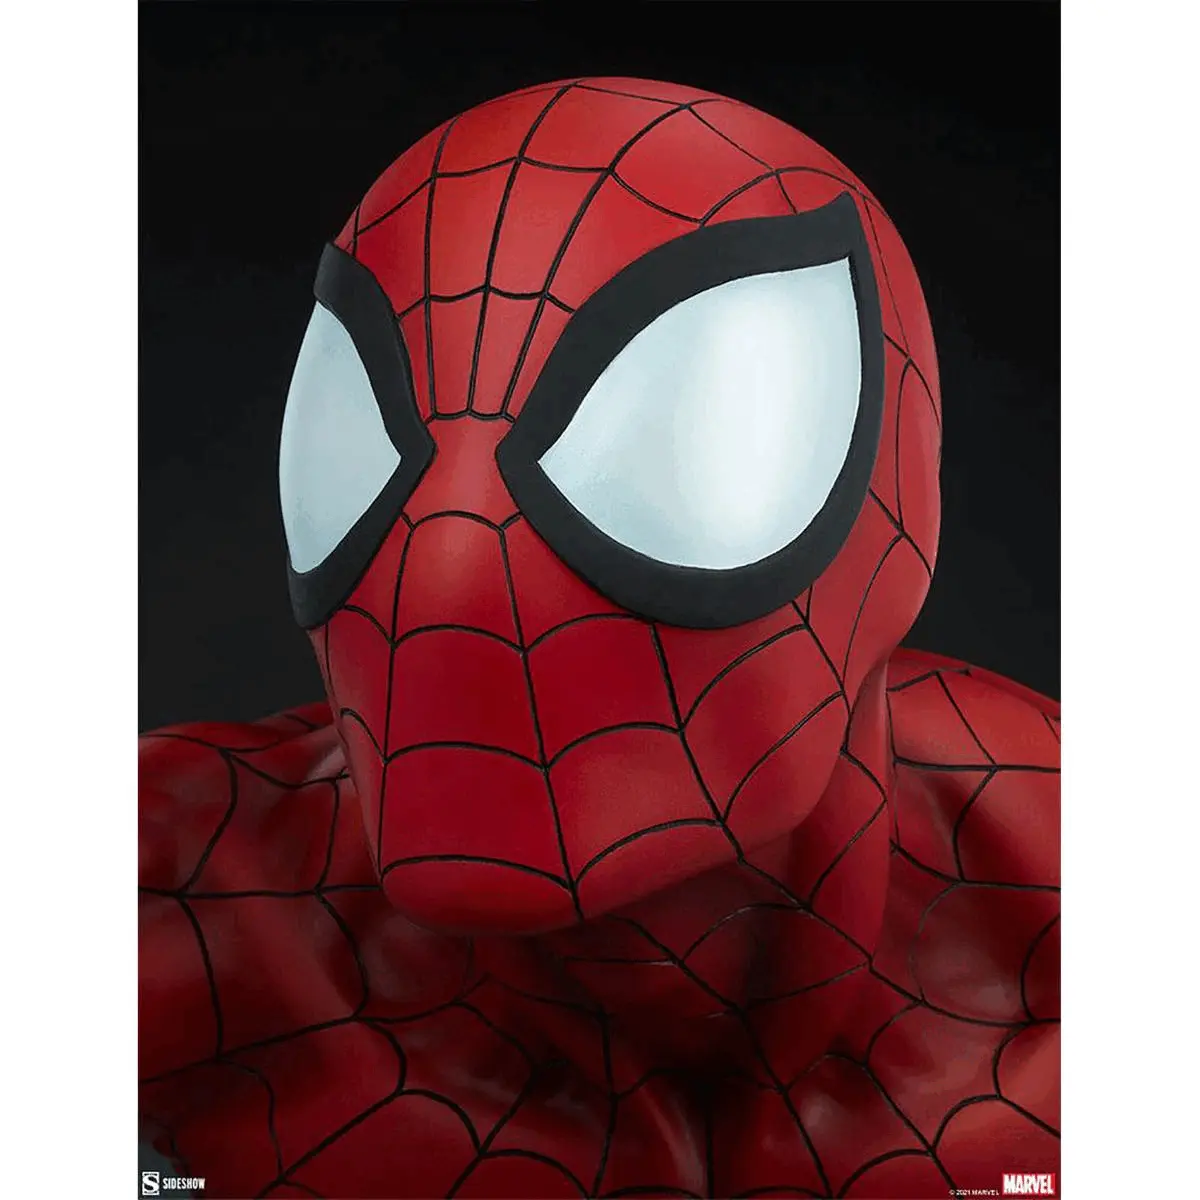 Gif showing the Spiderman bust from multiple angles